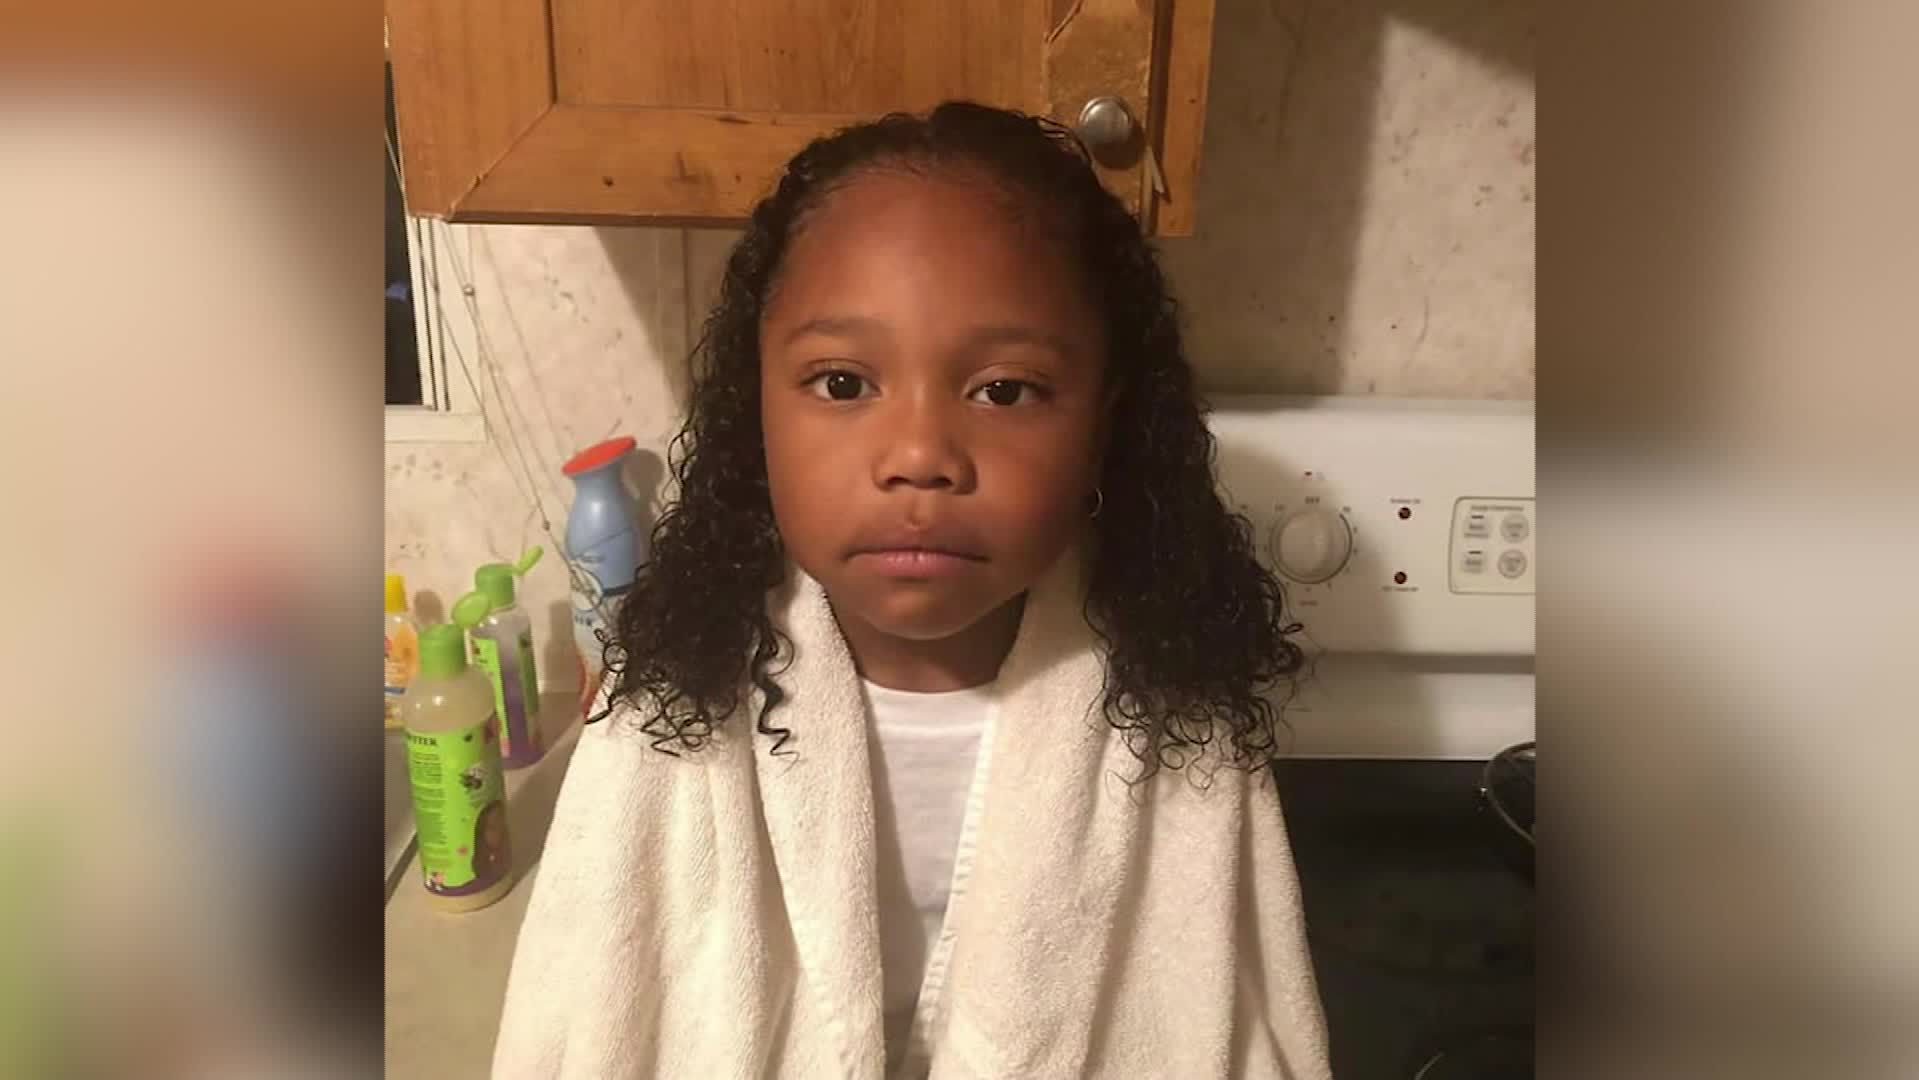 Tink's long hair is in violation of the school district's dress code, his grandmother says she was told.